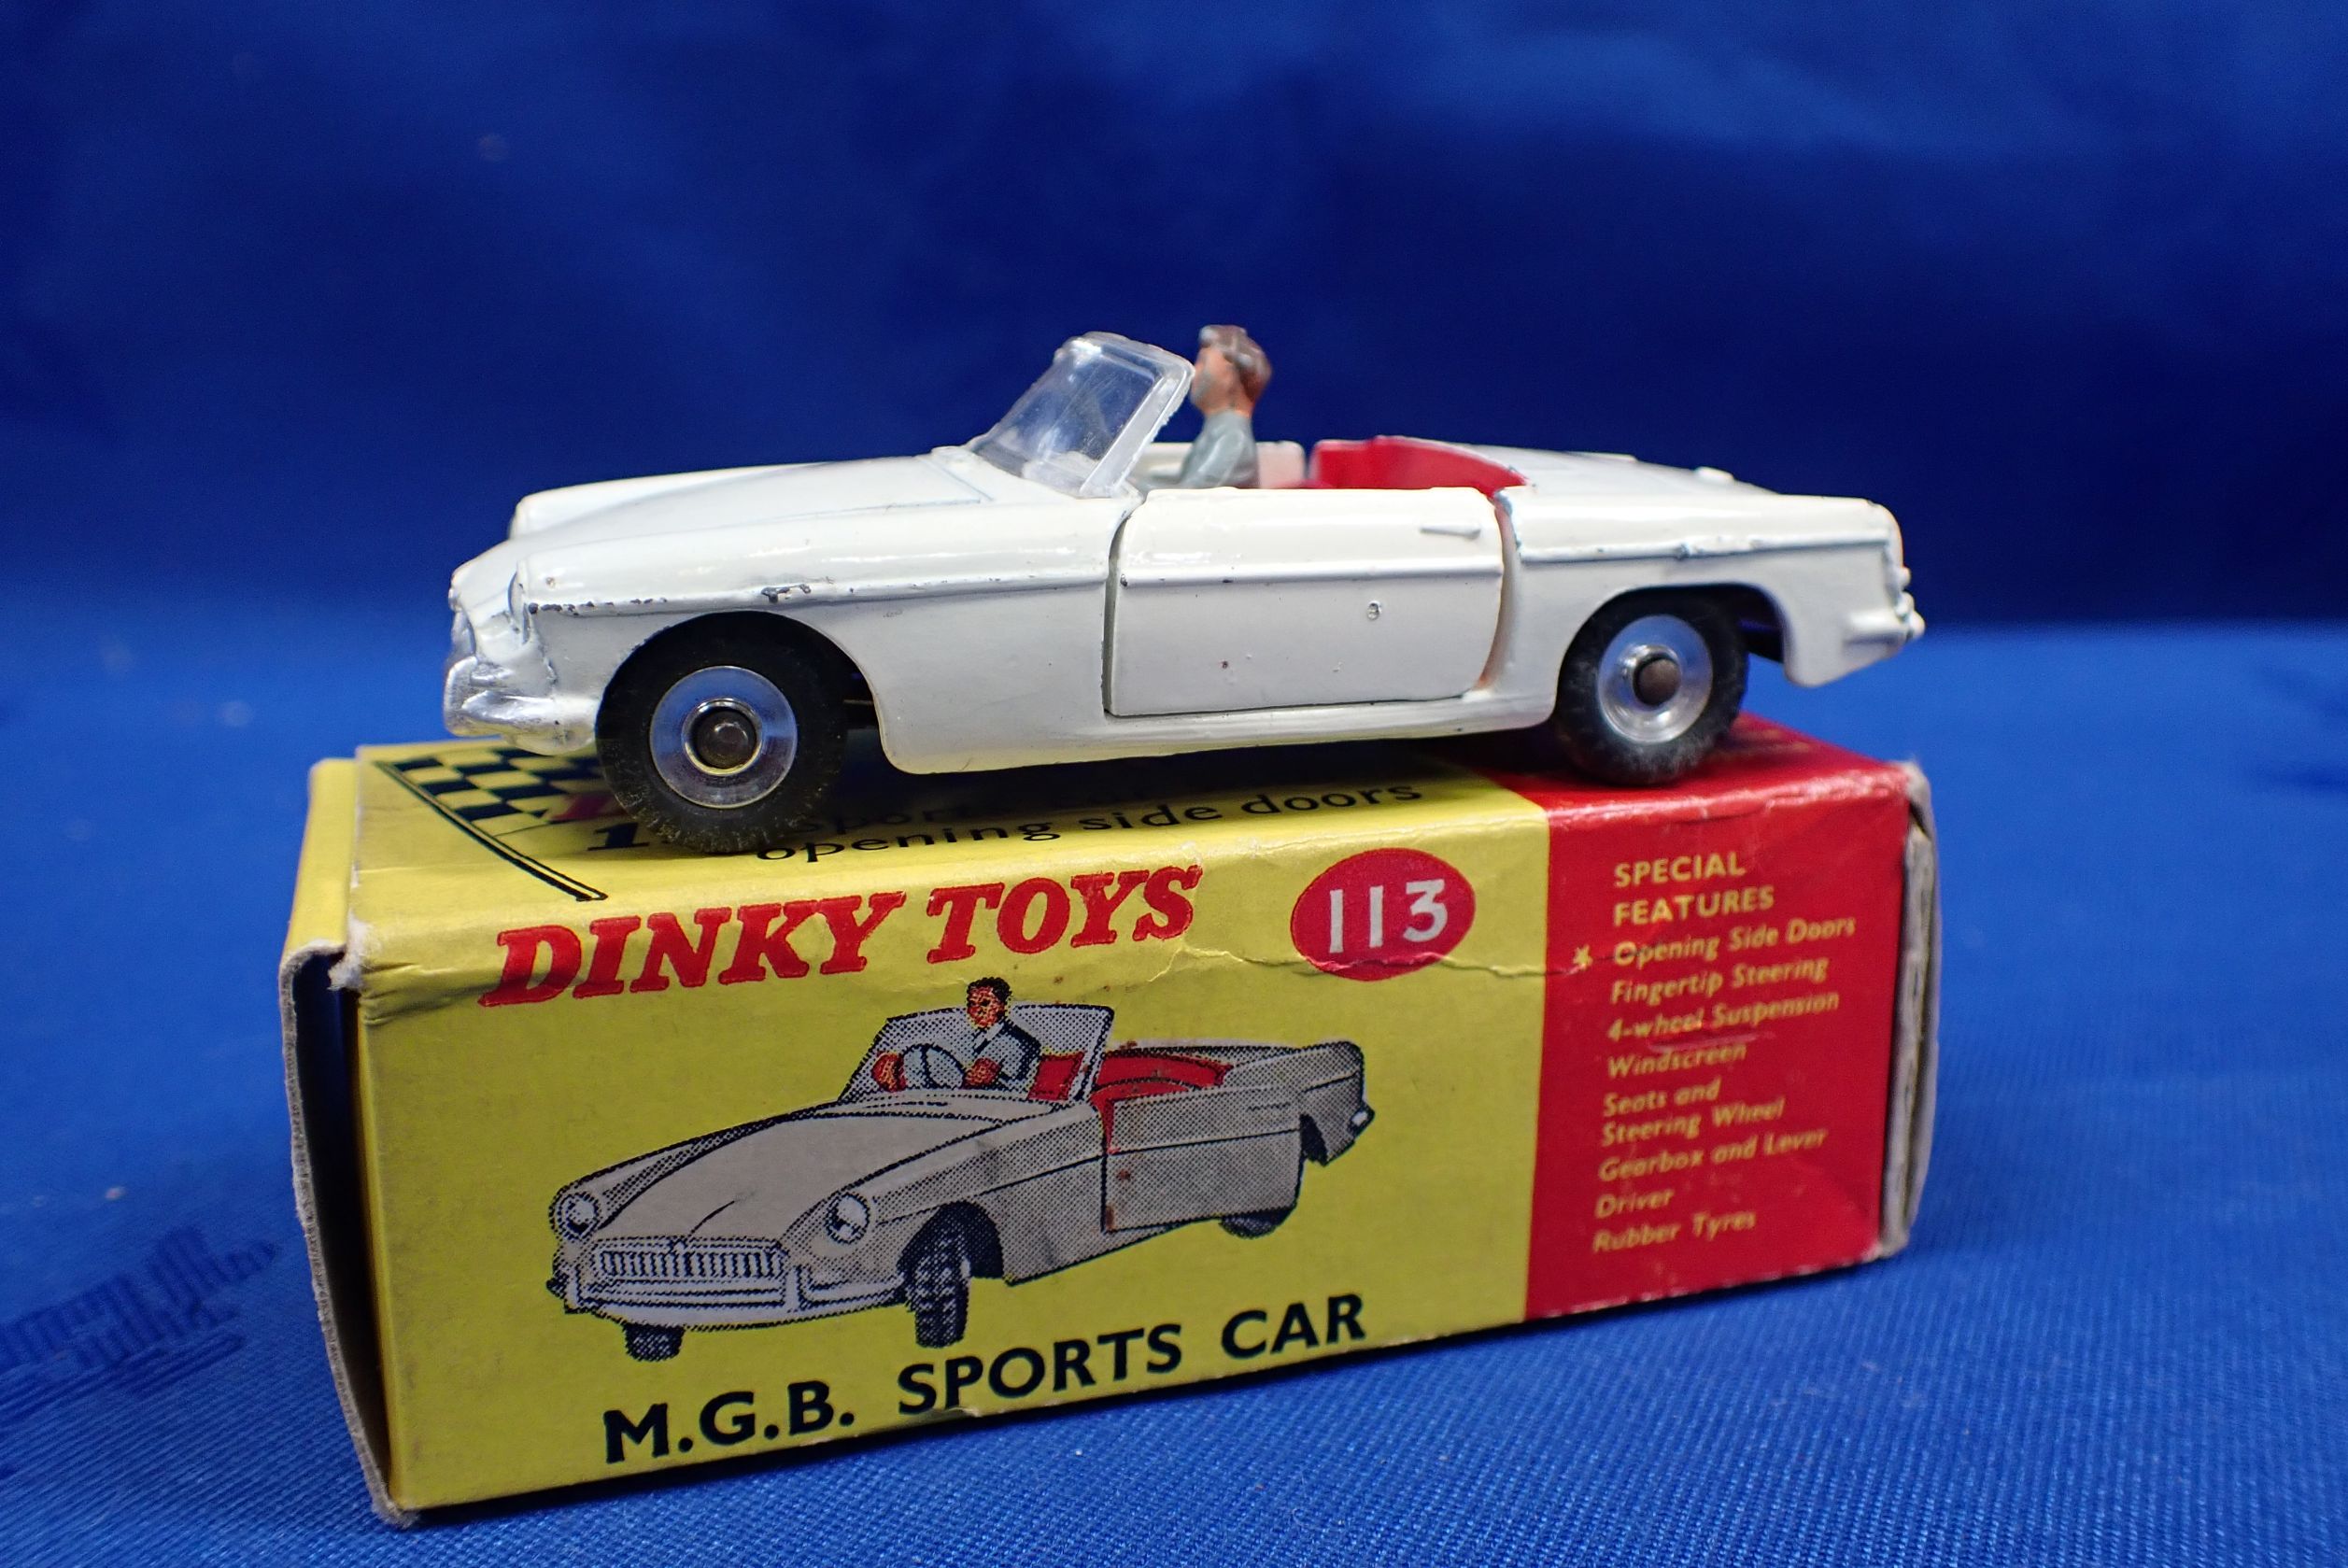 DINKY TOYS 'LOTUS RACING CAR' AND M.G.B SPORTS CAR' - Image 3 of 4